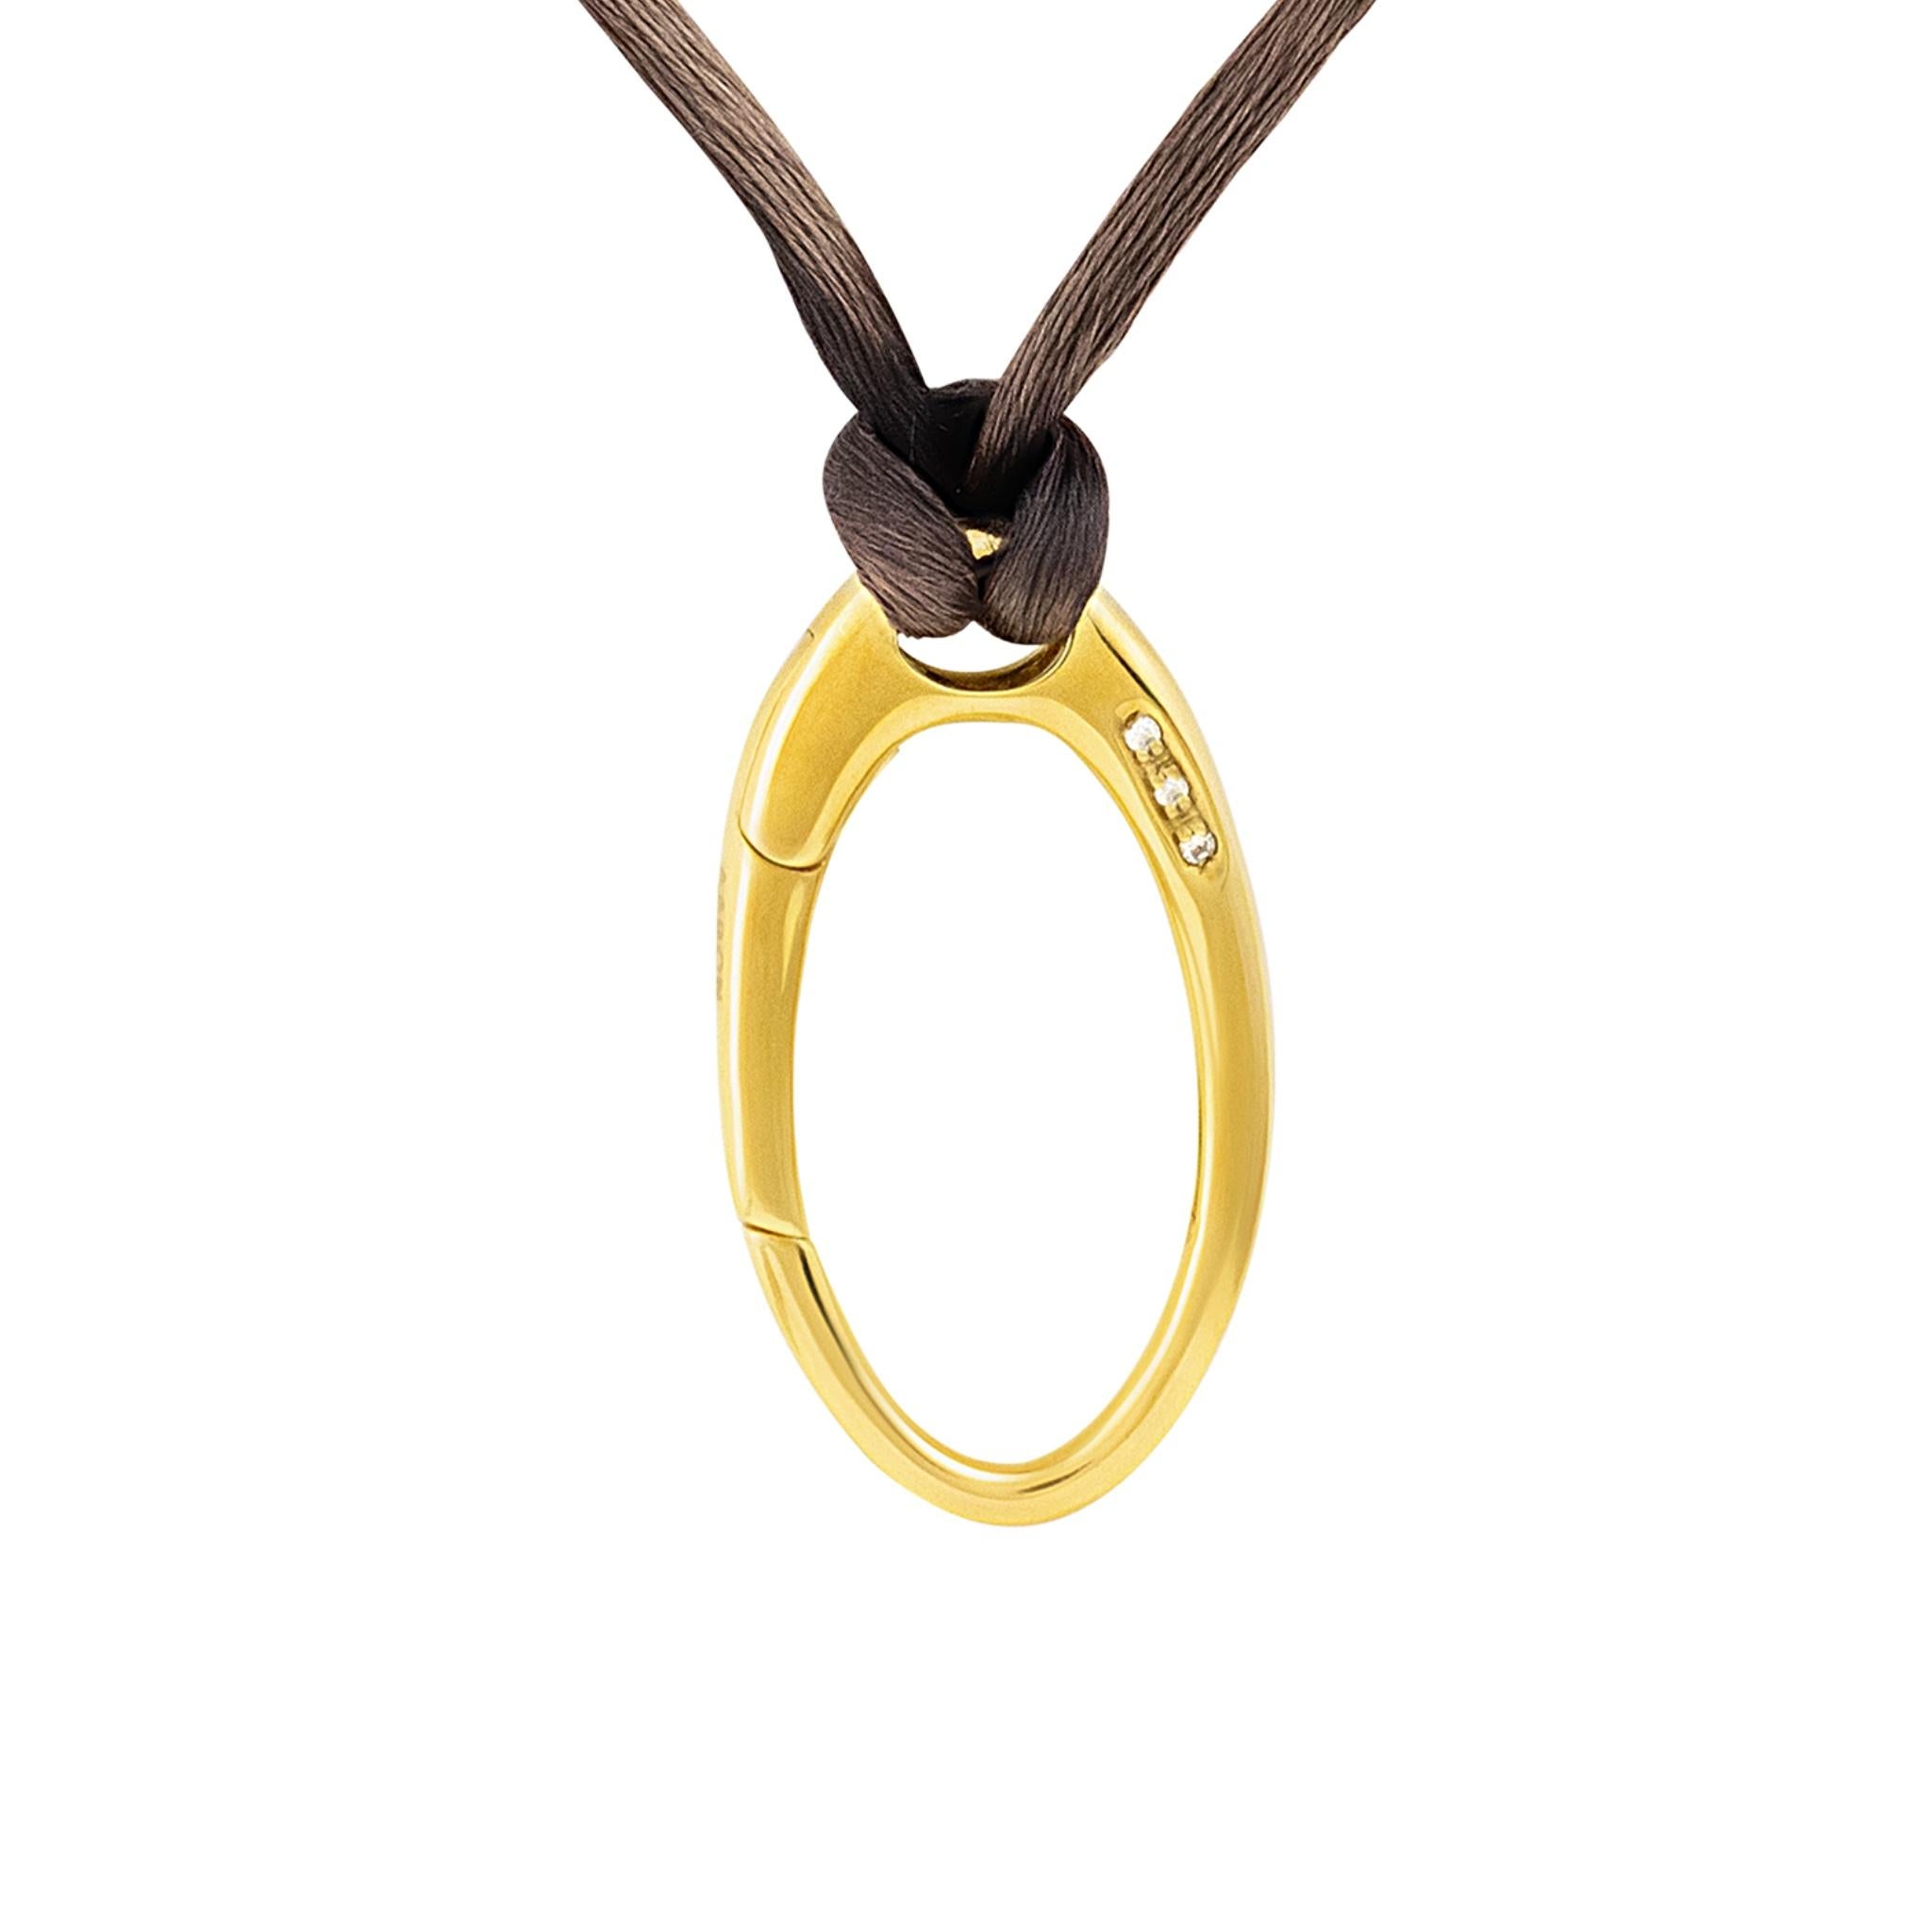 Black Satin Pendant Necklace
18K Yellow Gold
Reference number: ABS01007